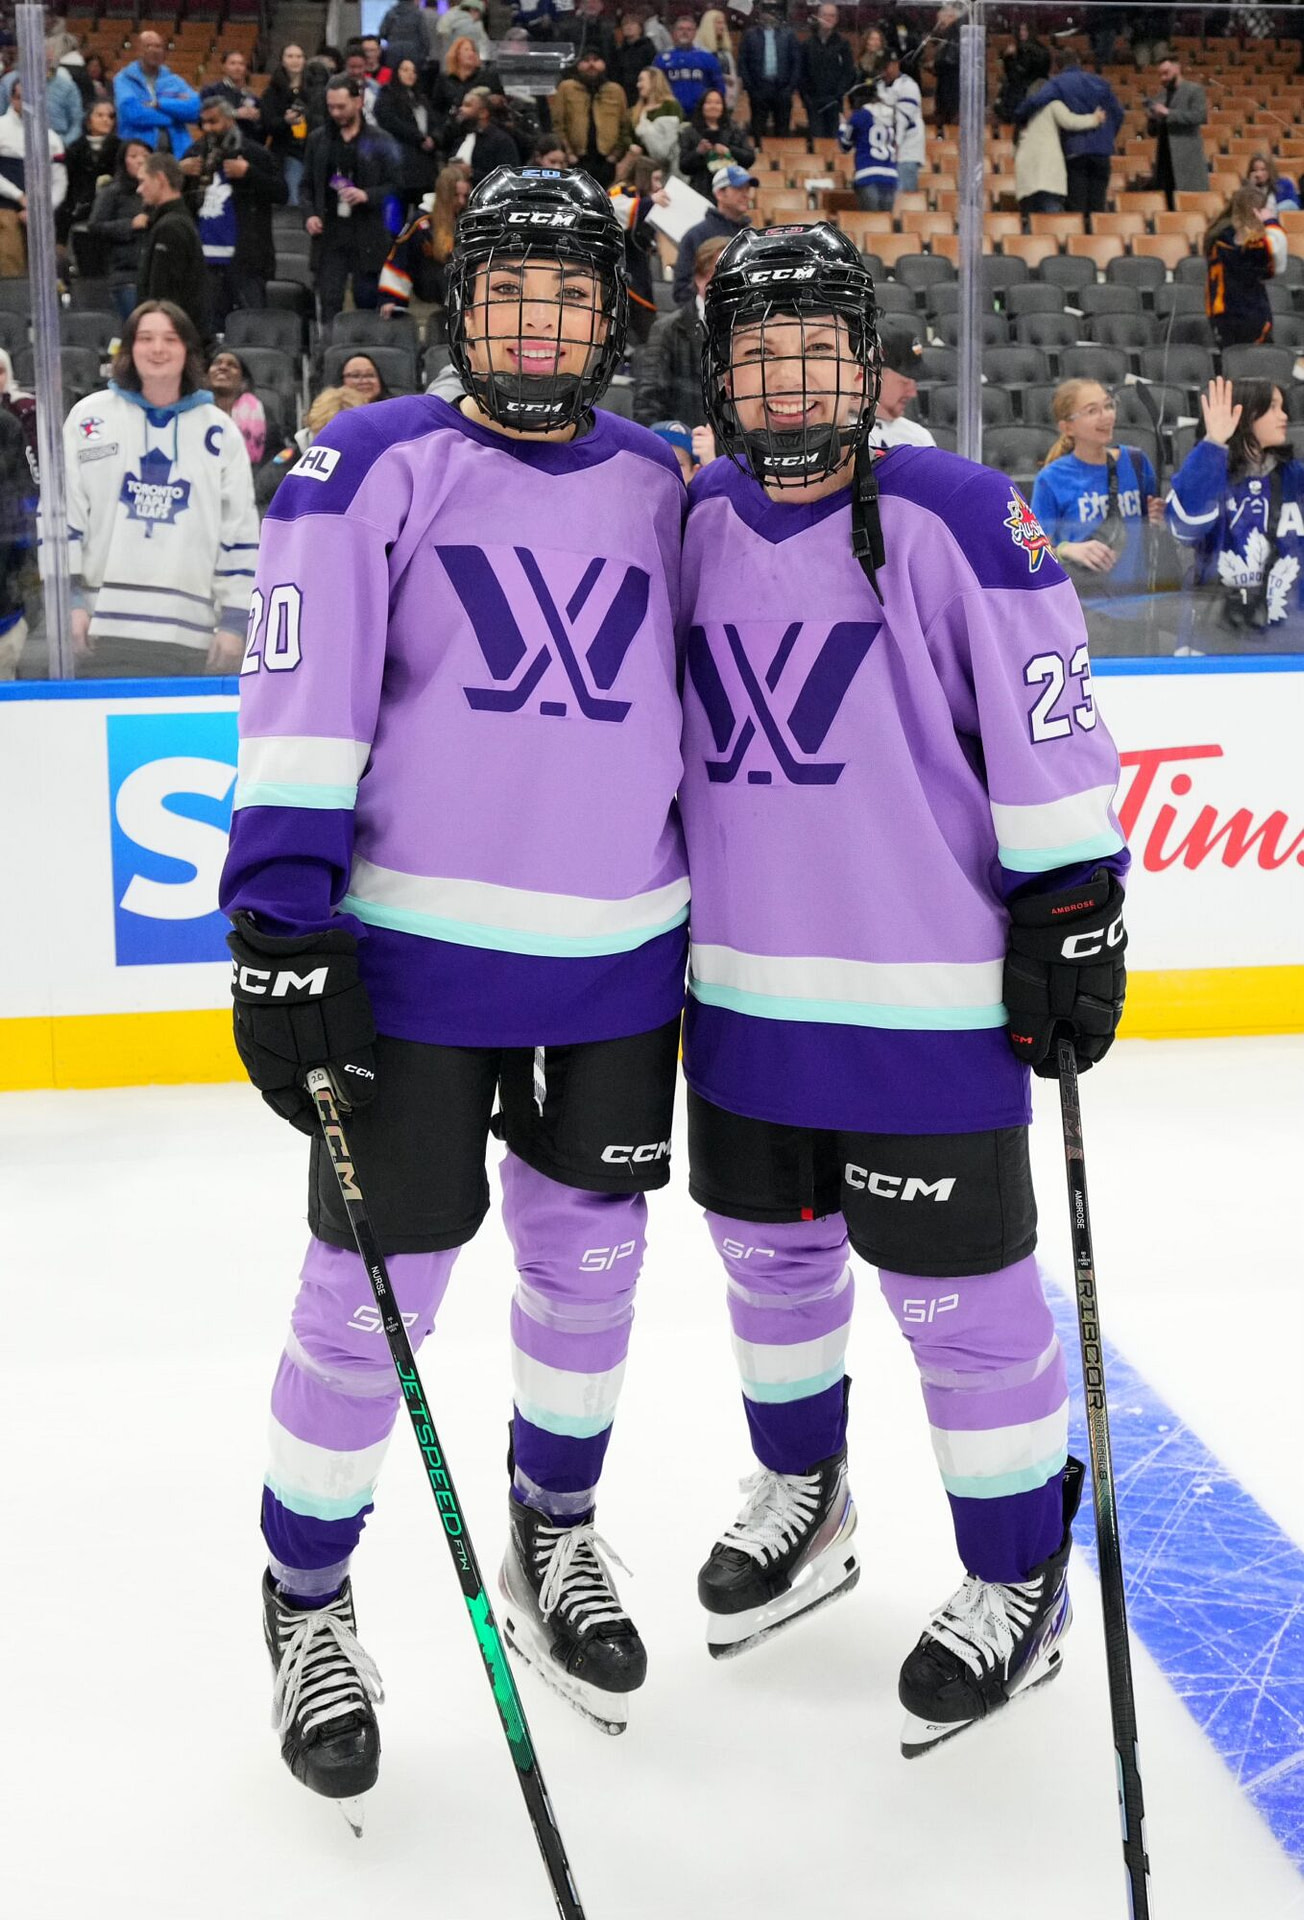 PWHL Showcases Talent at NHL All-Star Weekend